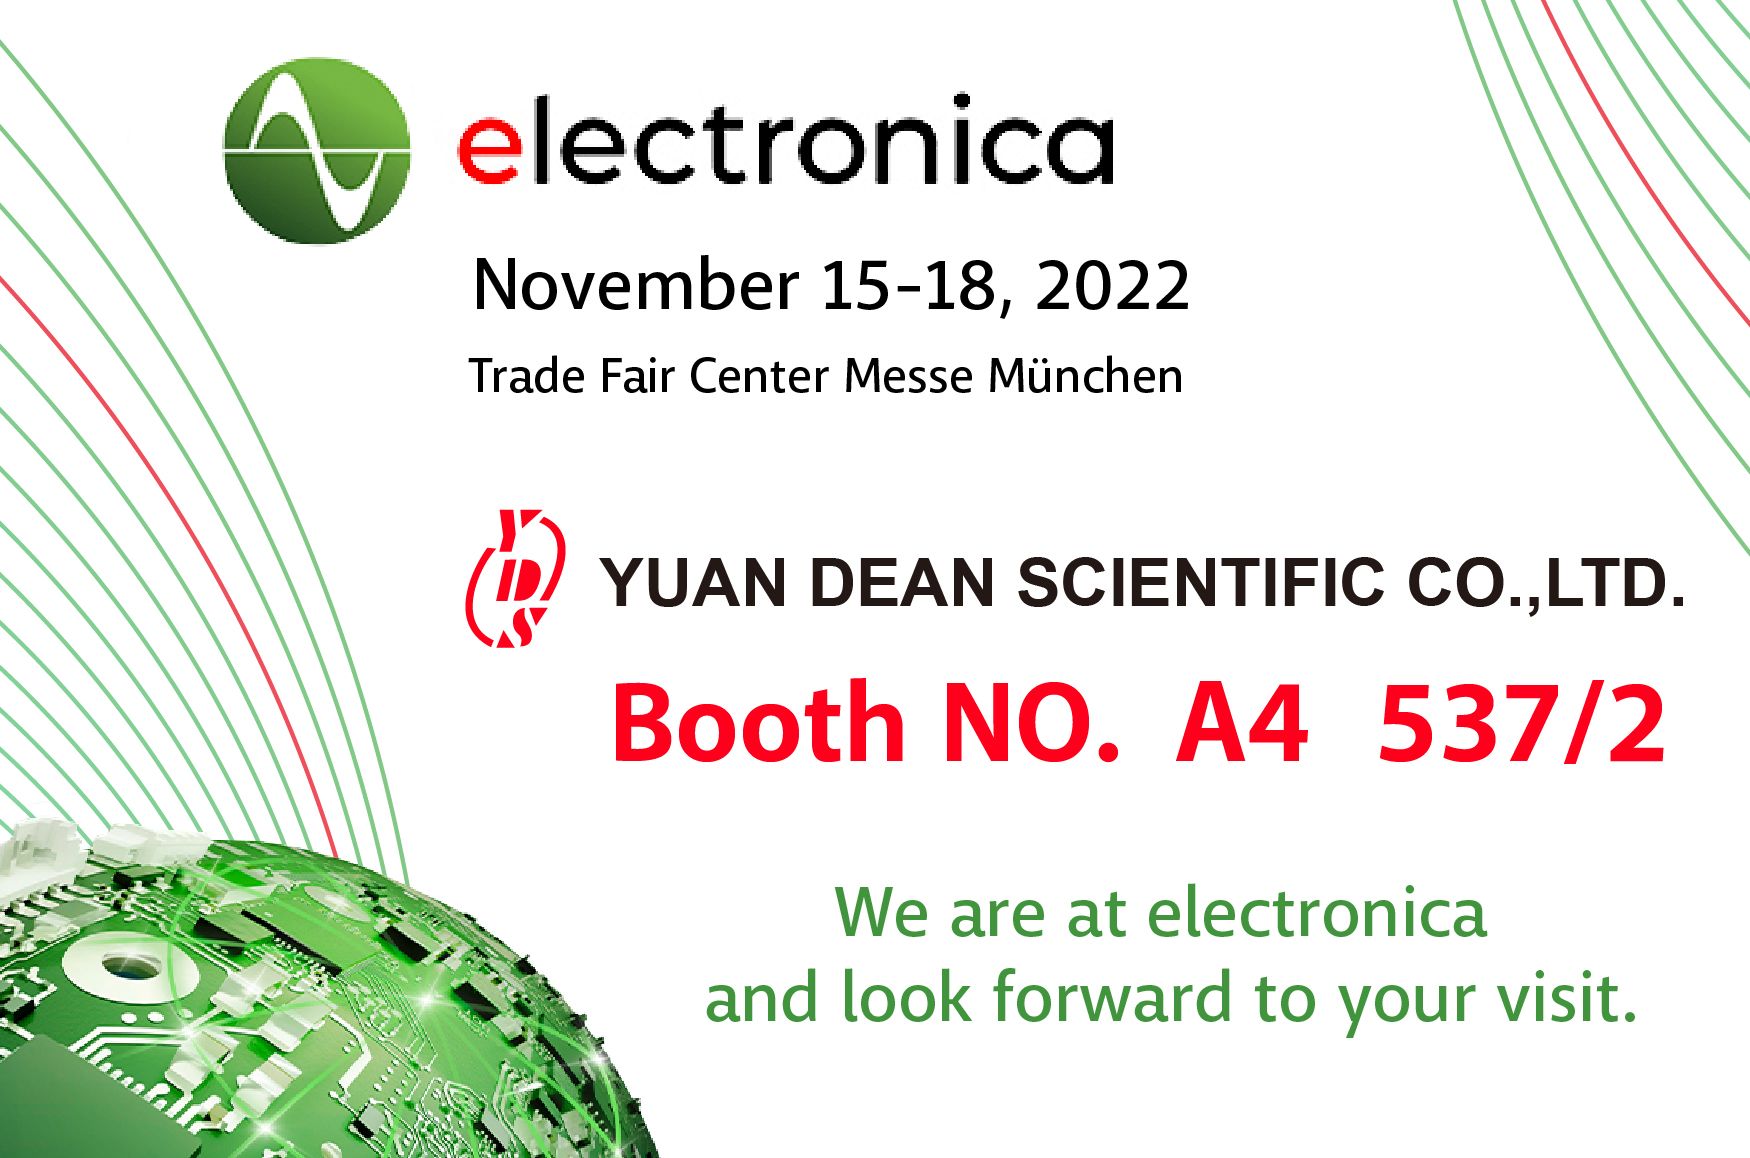 Join us at Hall A4 537/2 from Nov. 15-18, 2022 in Munich, Germany.